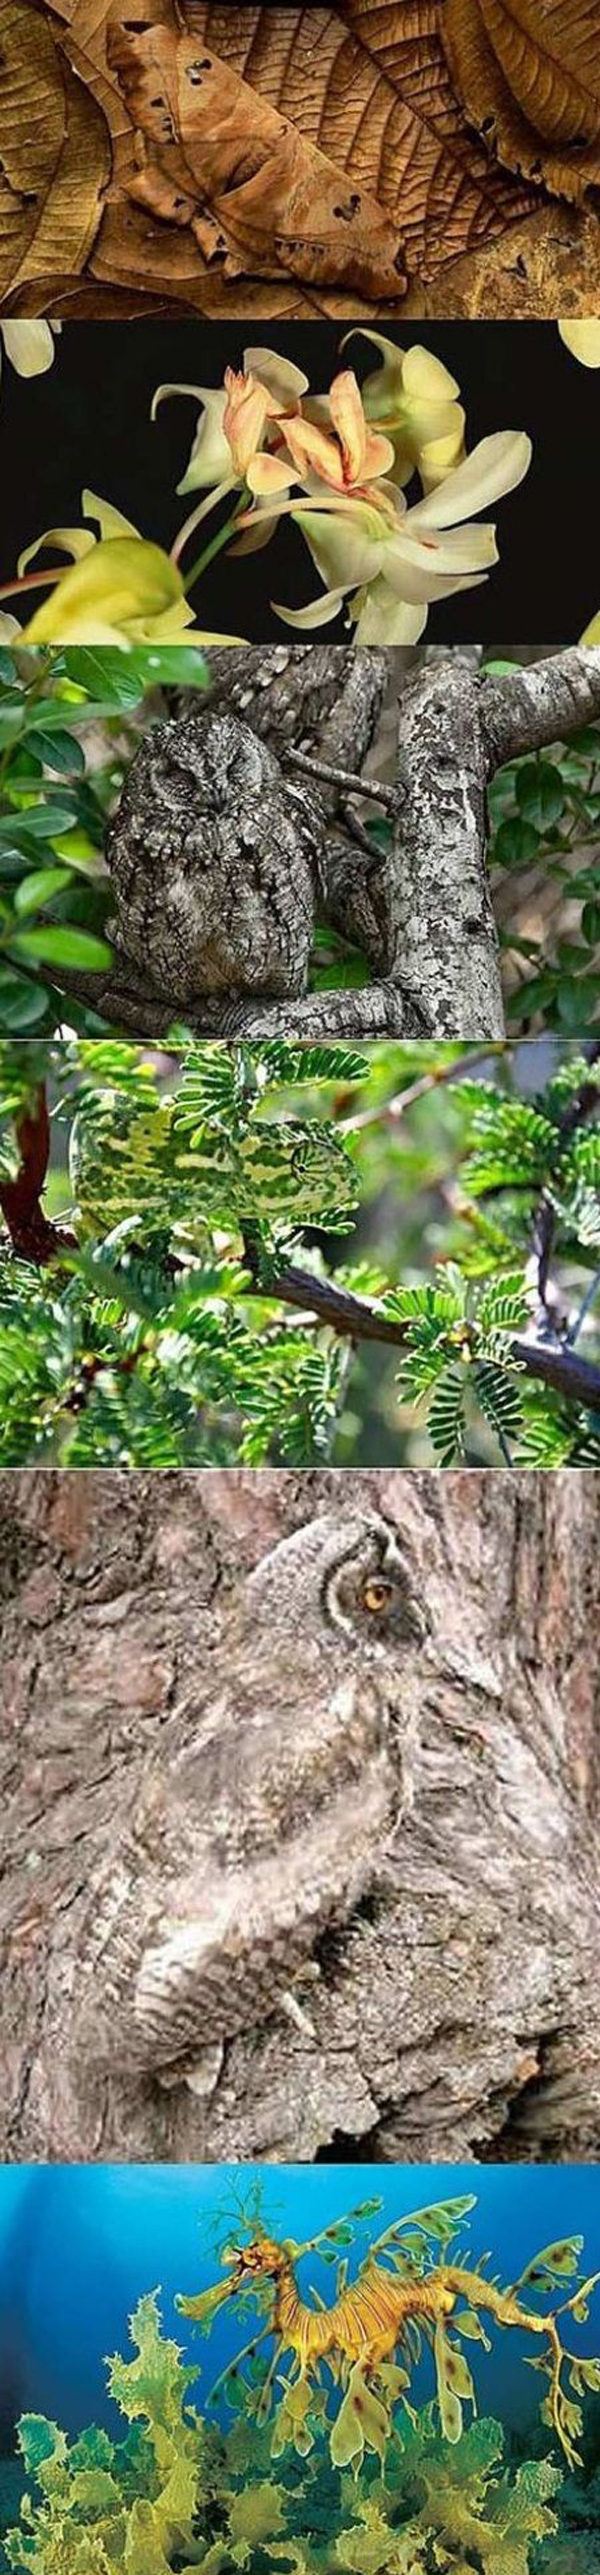 cool animal camouflage